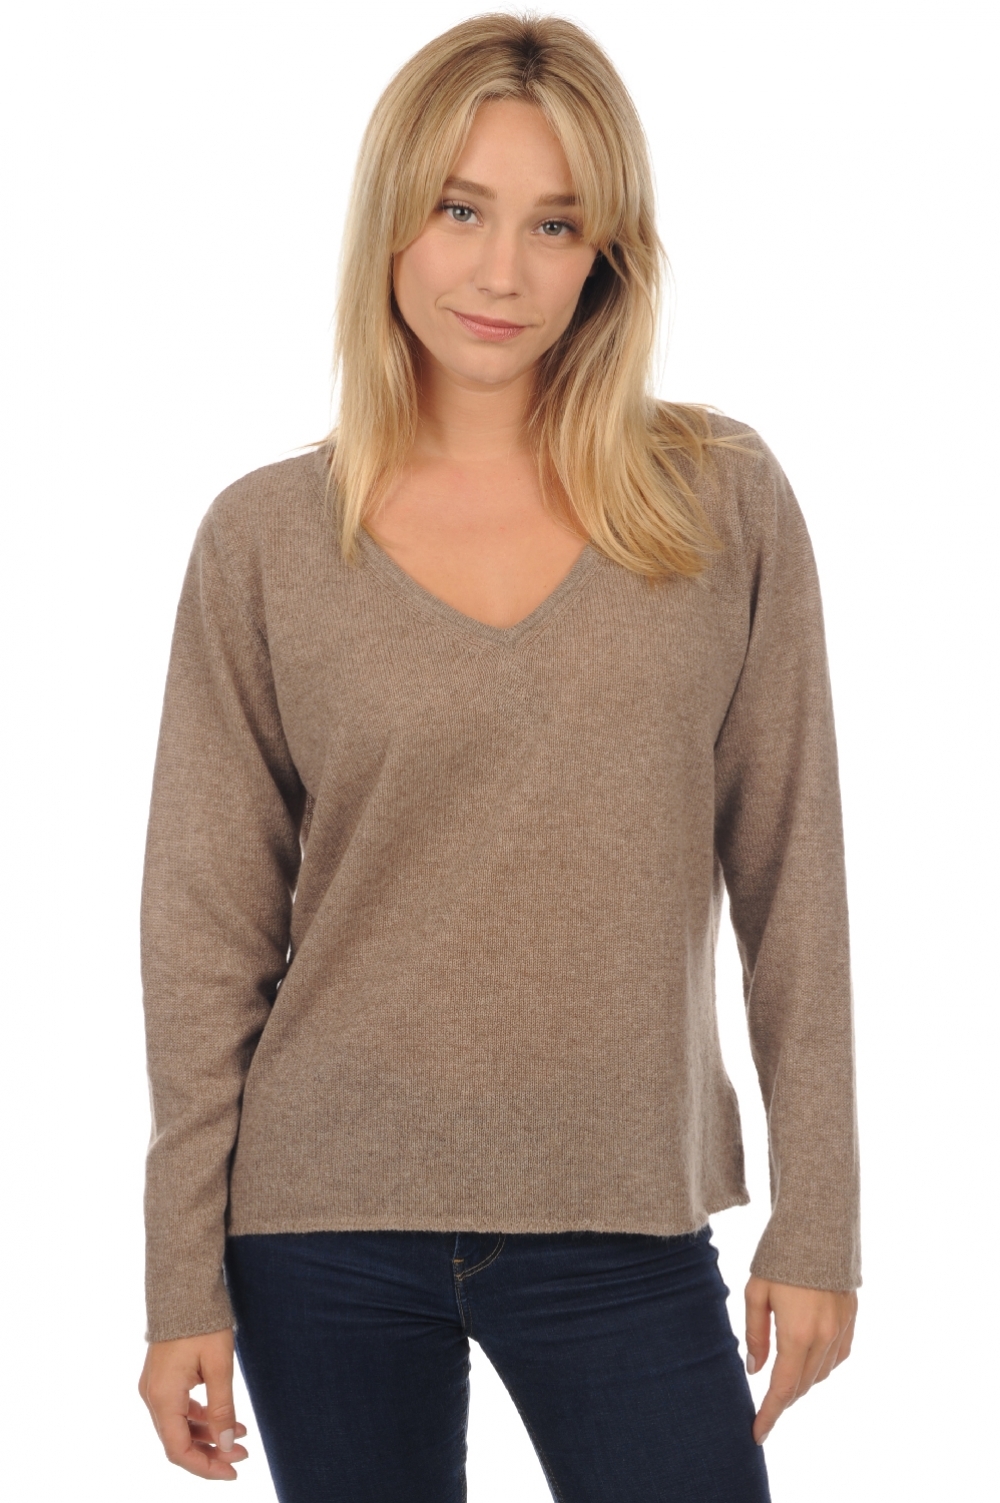 Cashmere ladies basic sweaters at low prices flavie natural brown xl